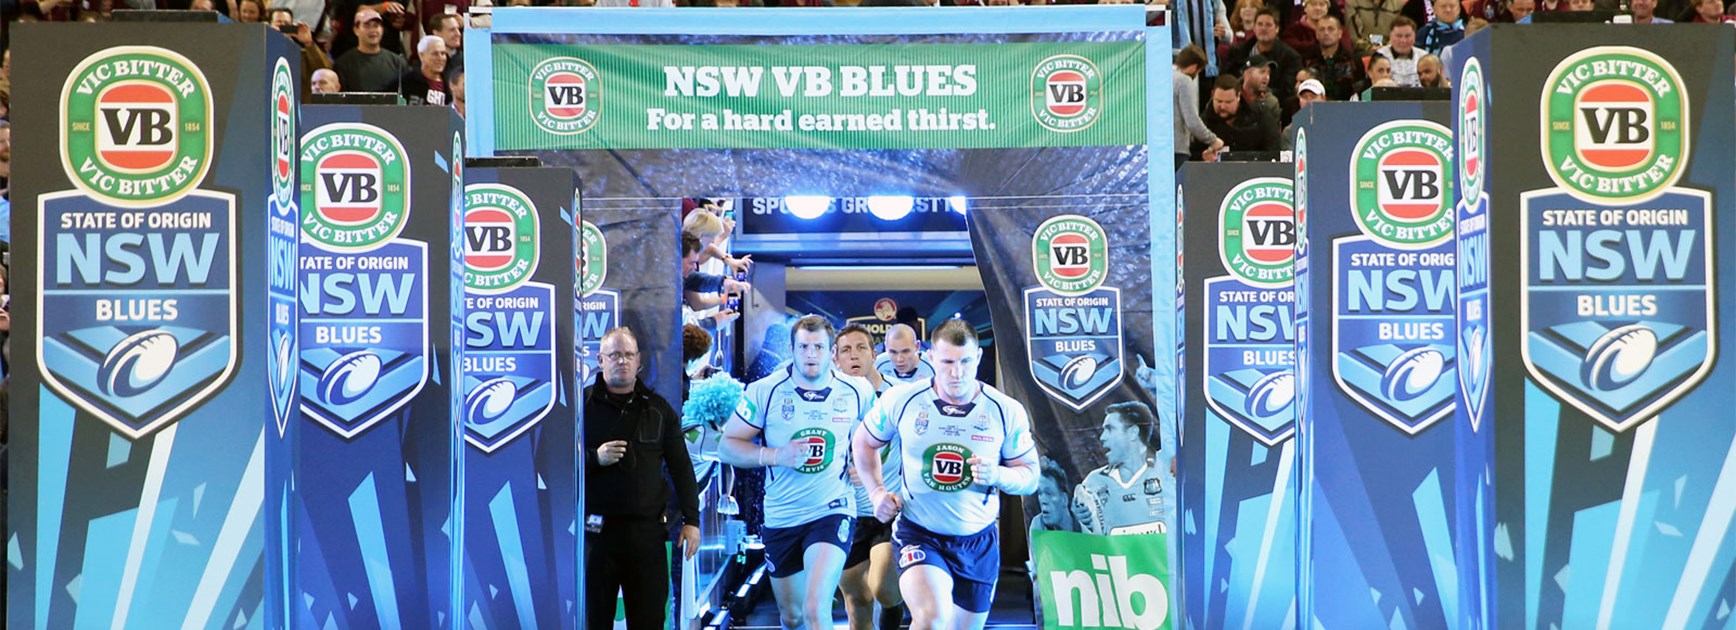 Paul Gallen leads the NSW Blues onto the field during the 2015 State of Origin series.